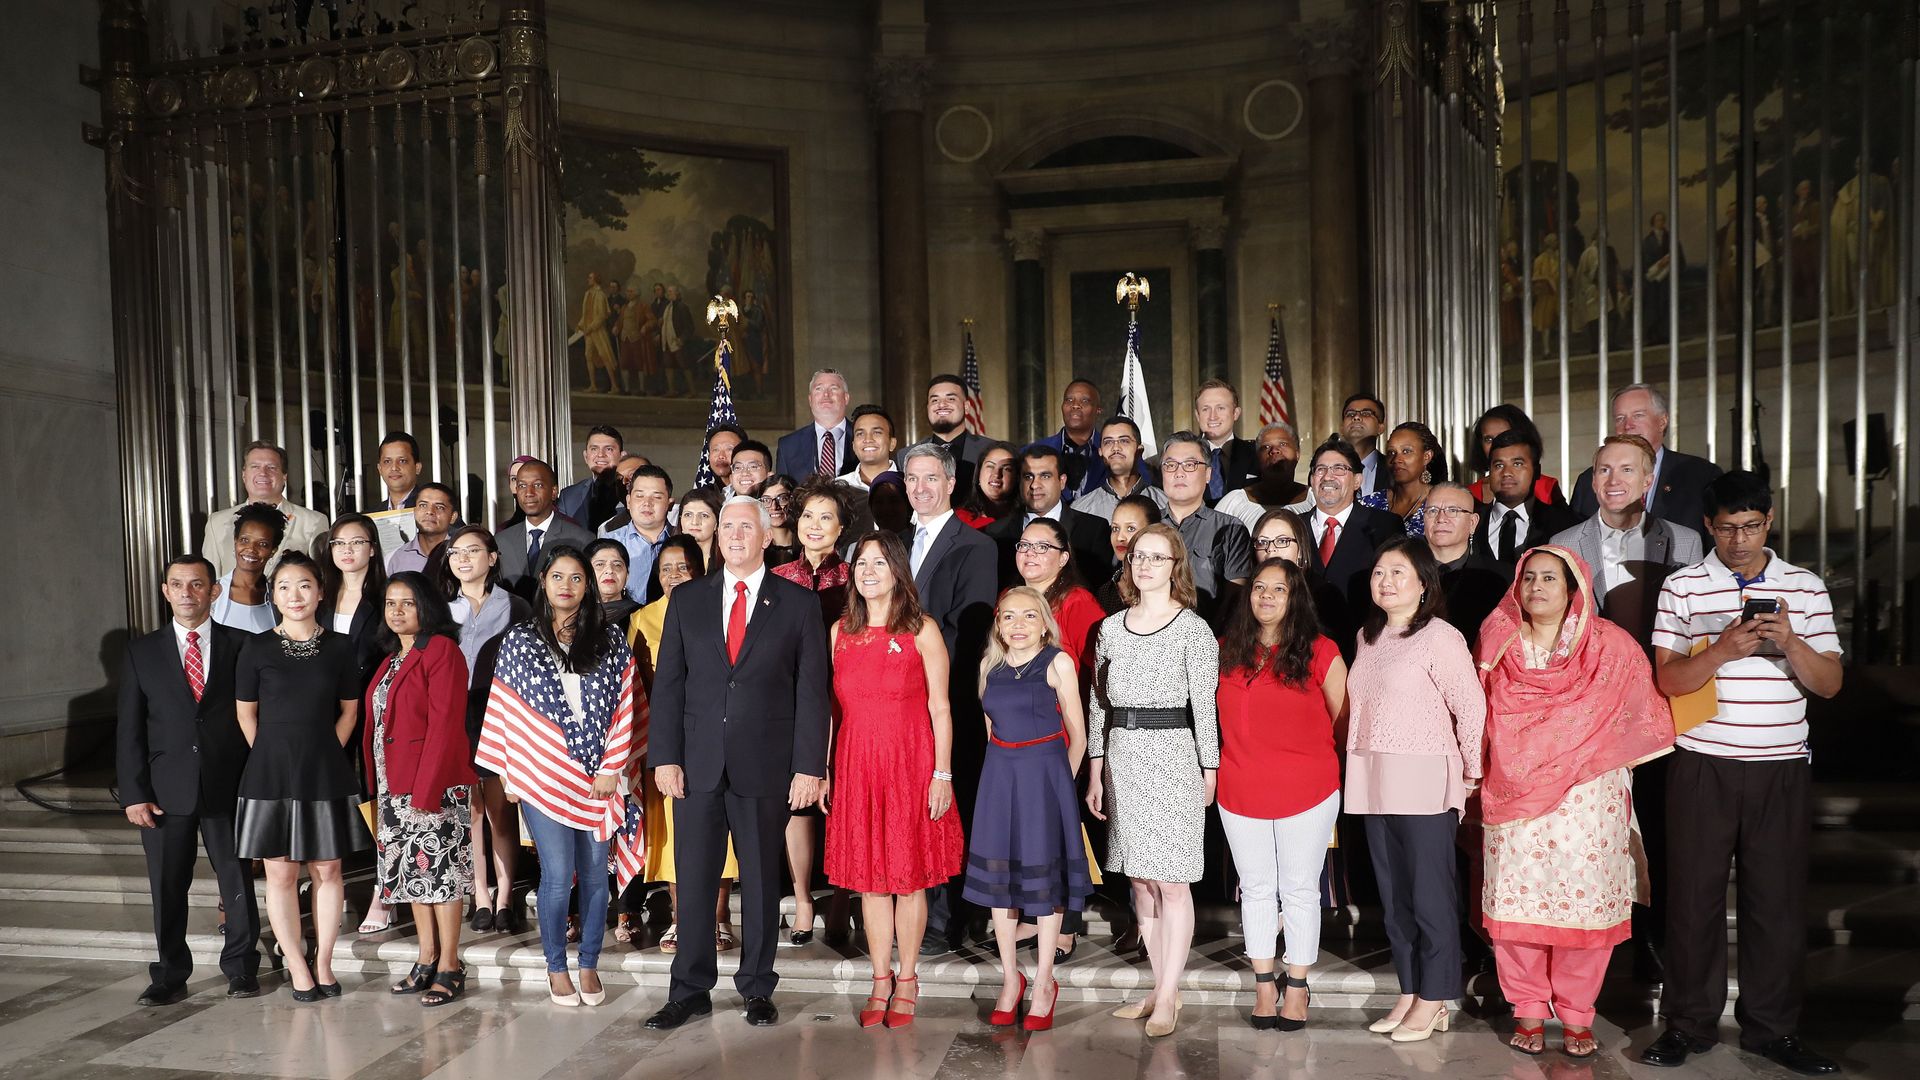 Last July 4, Vice President Pence and Karen Pence posed with new Americans after a naturalization ceremony at the National Archives